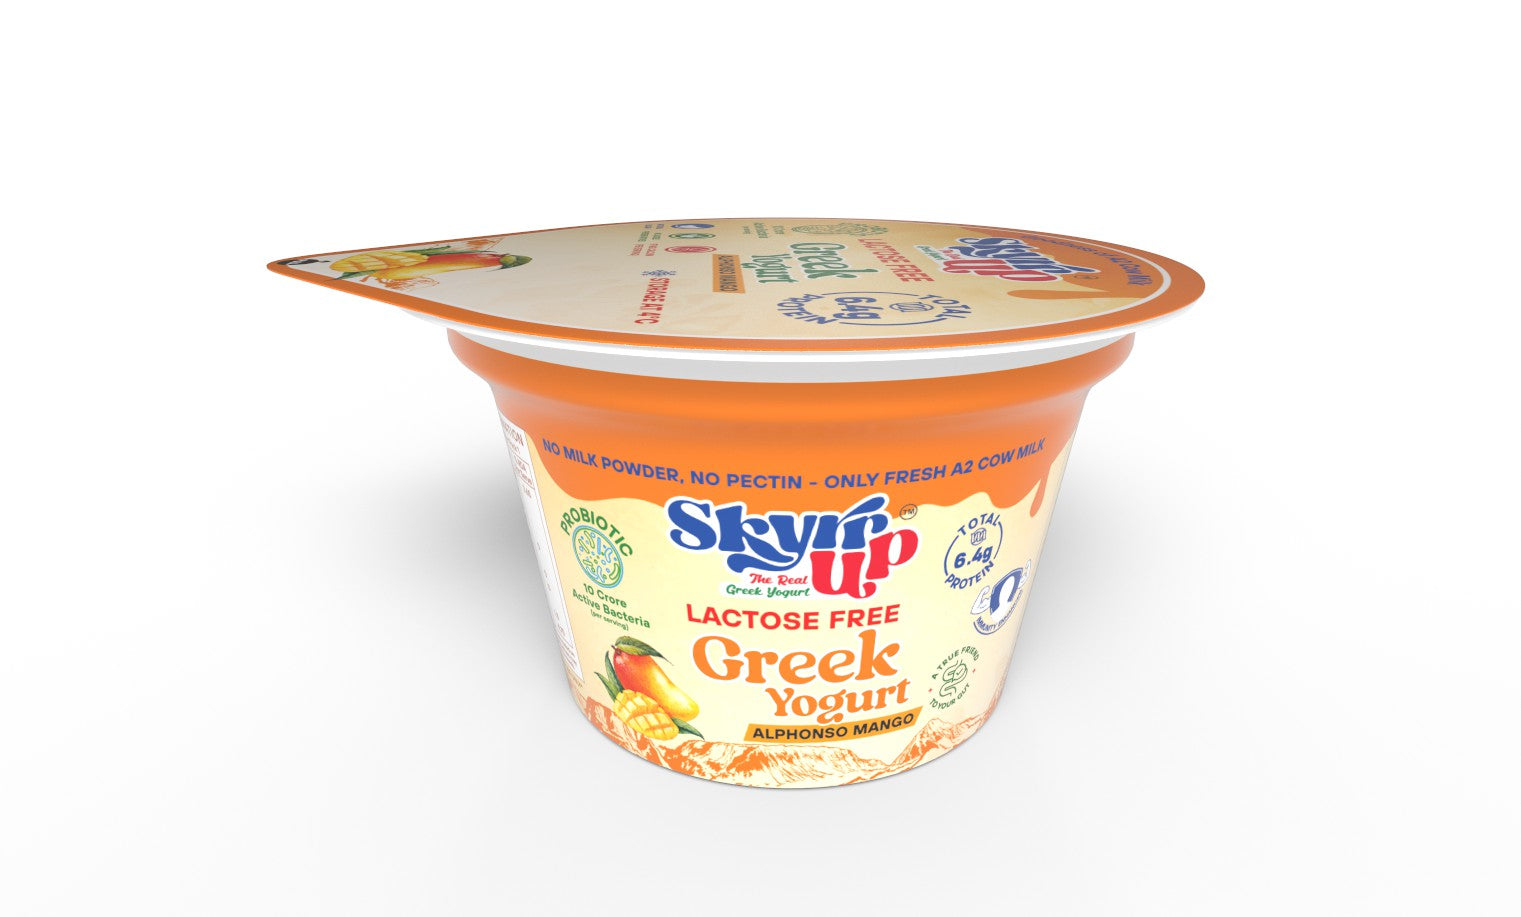 Greek Yogurt - 85gm - Mango (Made From A2 Cow Milk) - Probiotic, 6.4gm Protein, Zero Preservatives, Lactose Free- Pack of 6